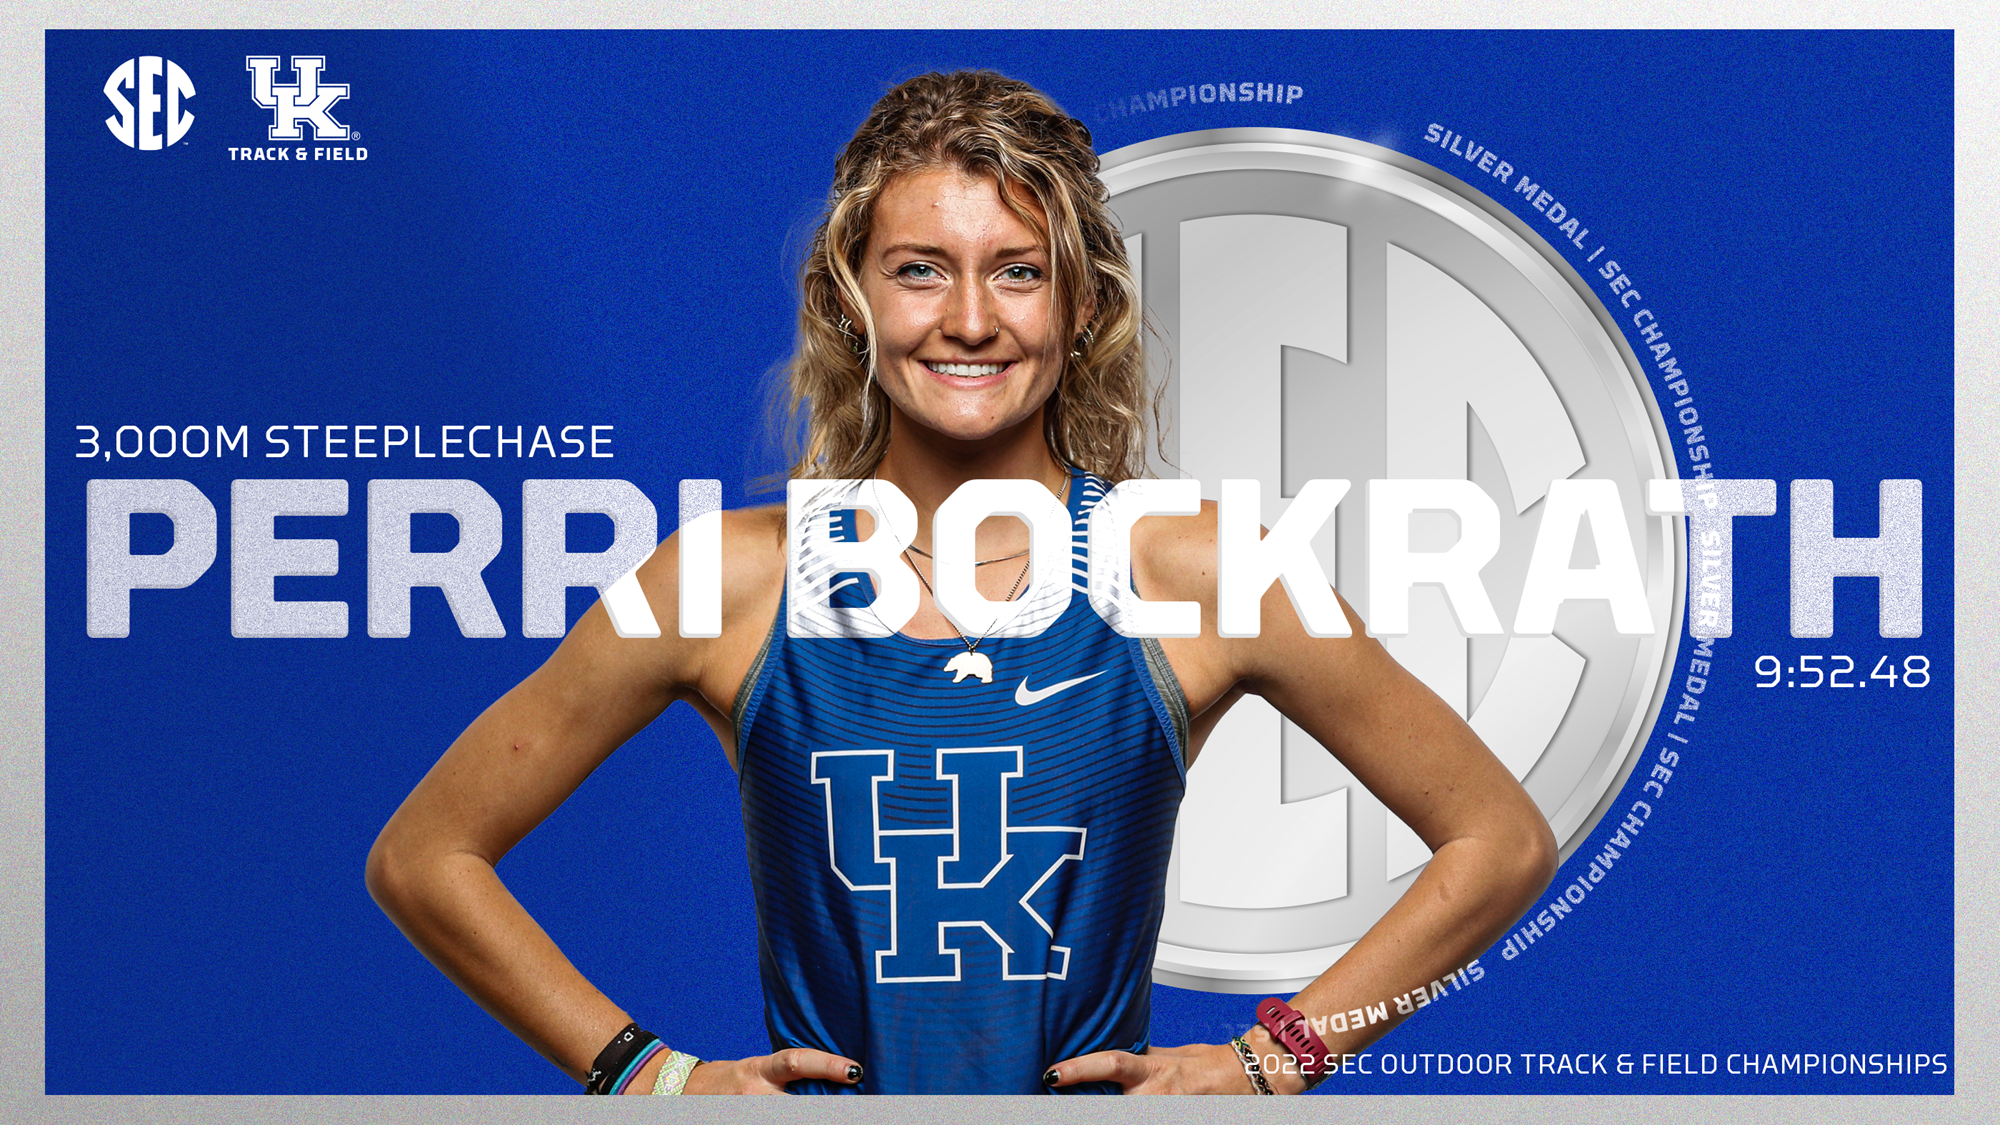 Perri Bockrath Earns 3,000S Silver, Two Throwers Score on Day Two of SEC Championships